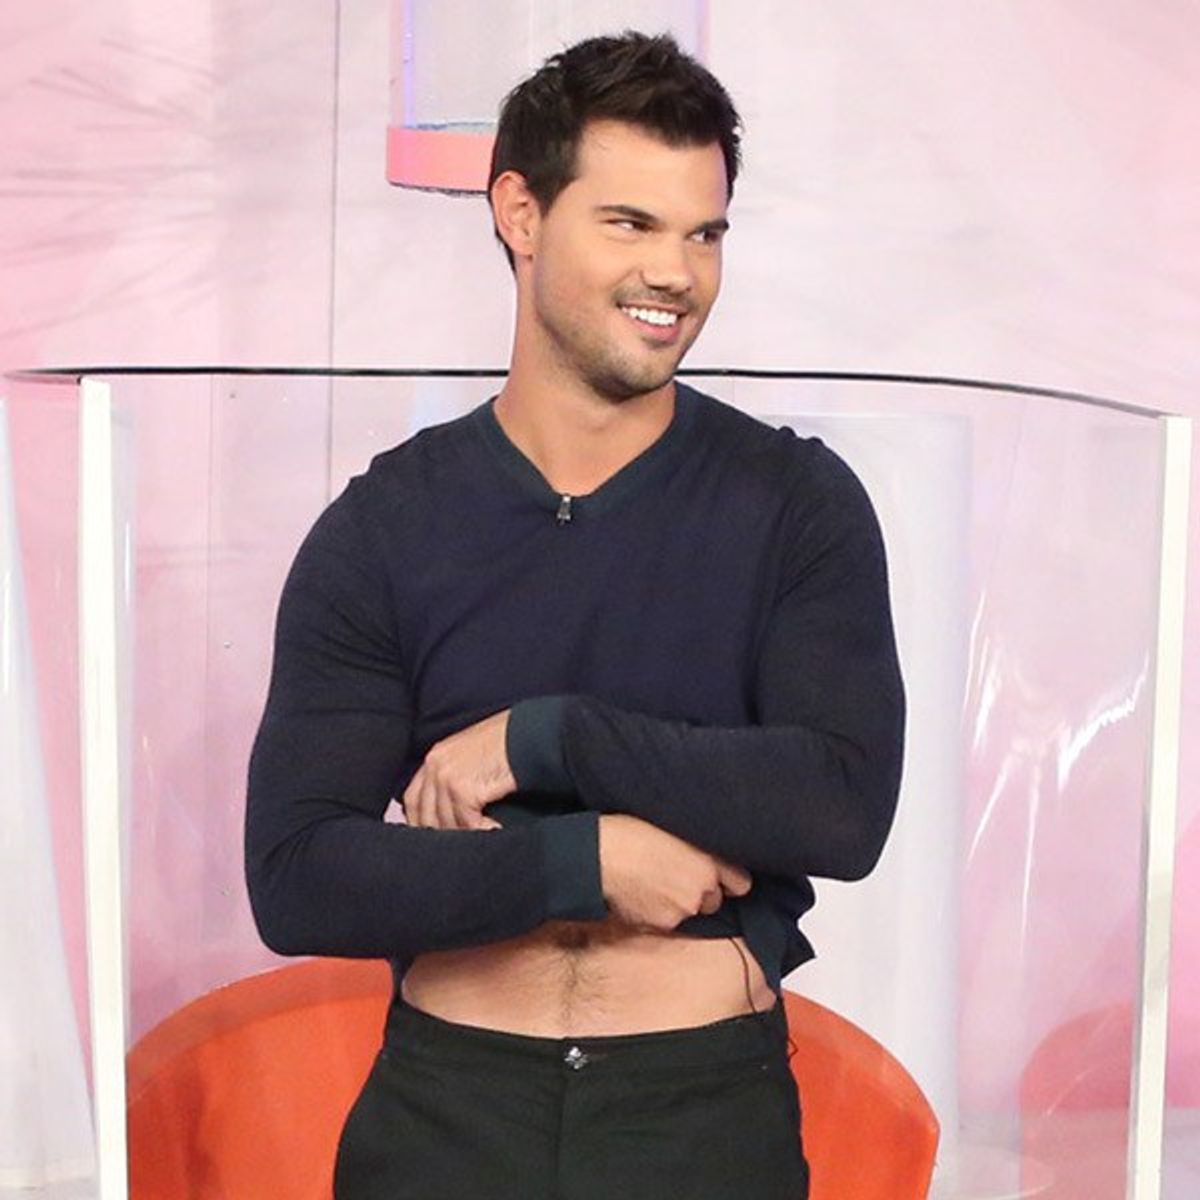 15 Reasons To Follow Taylor Lautner On Instagram